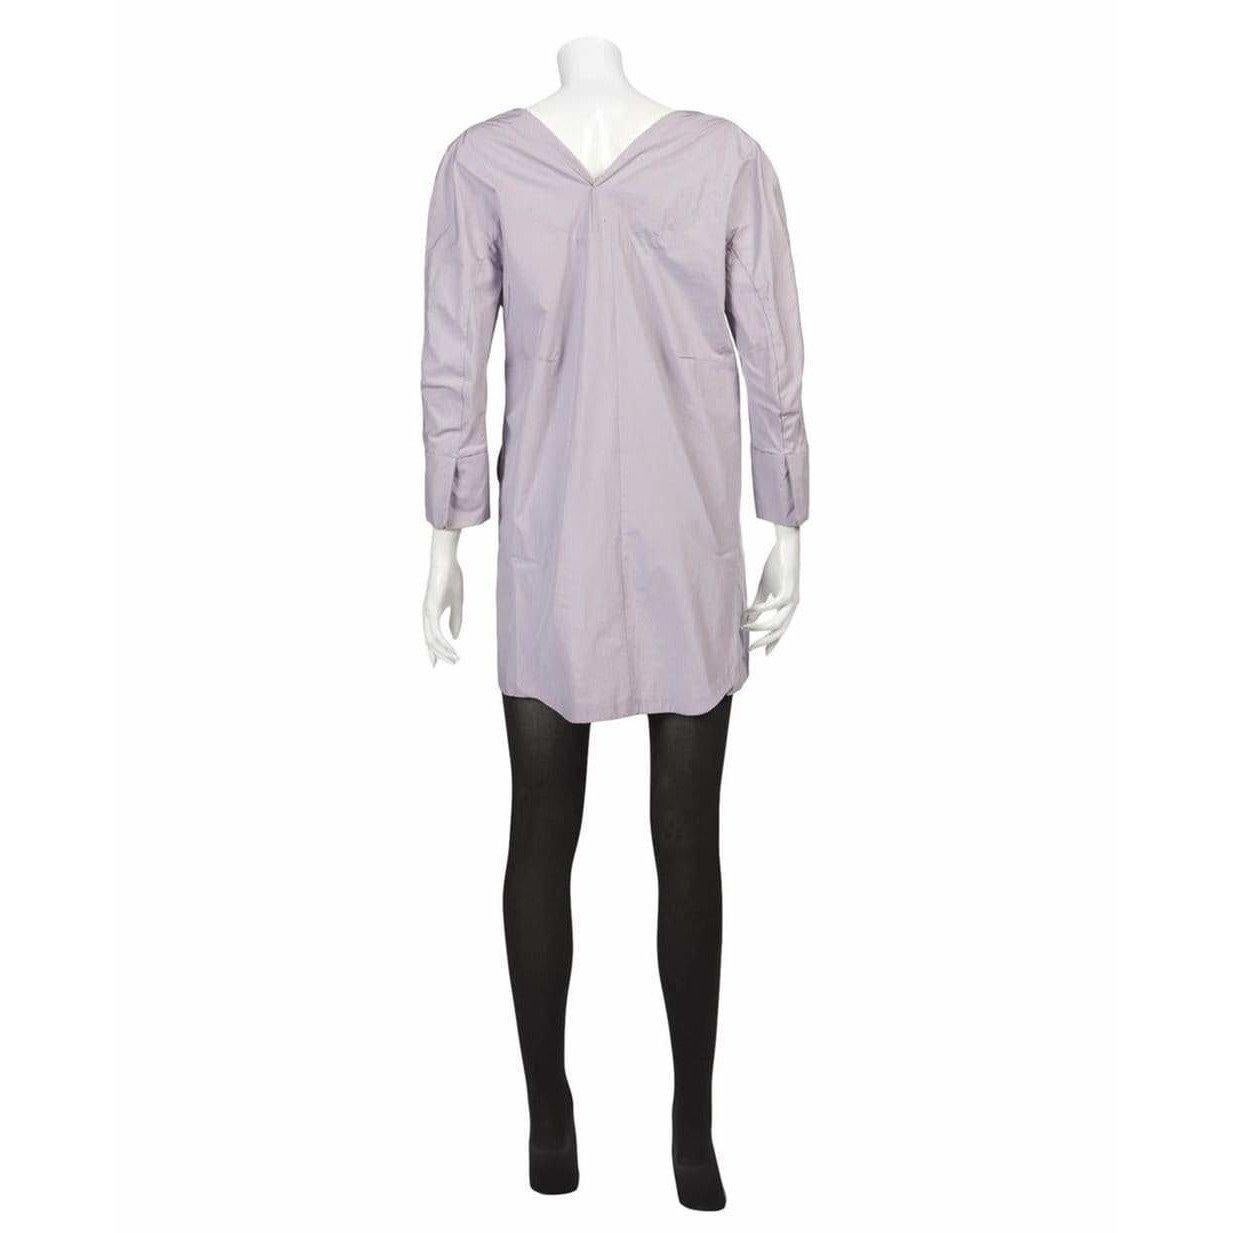 Undercover Lilac Shirt Dress In New Condition For Sale In Laguna Beach, CA